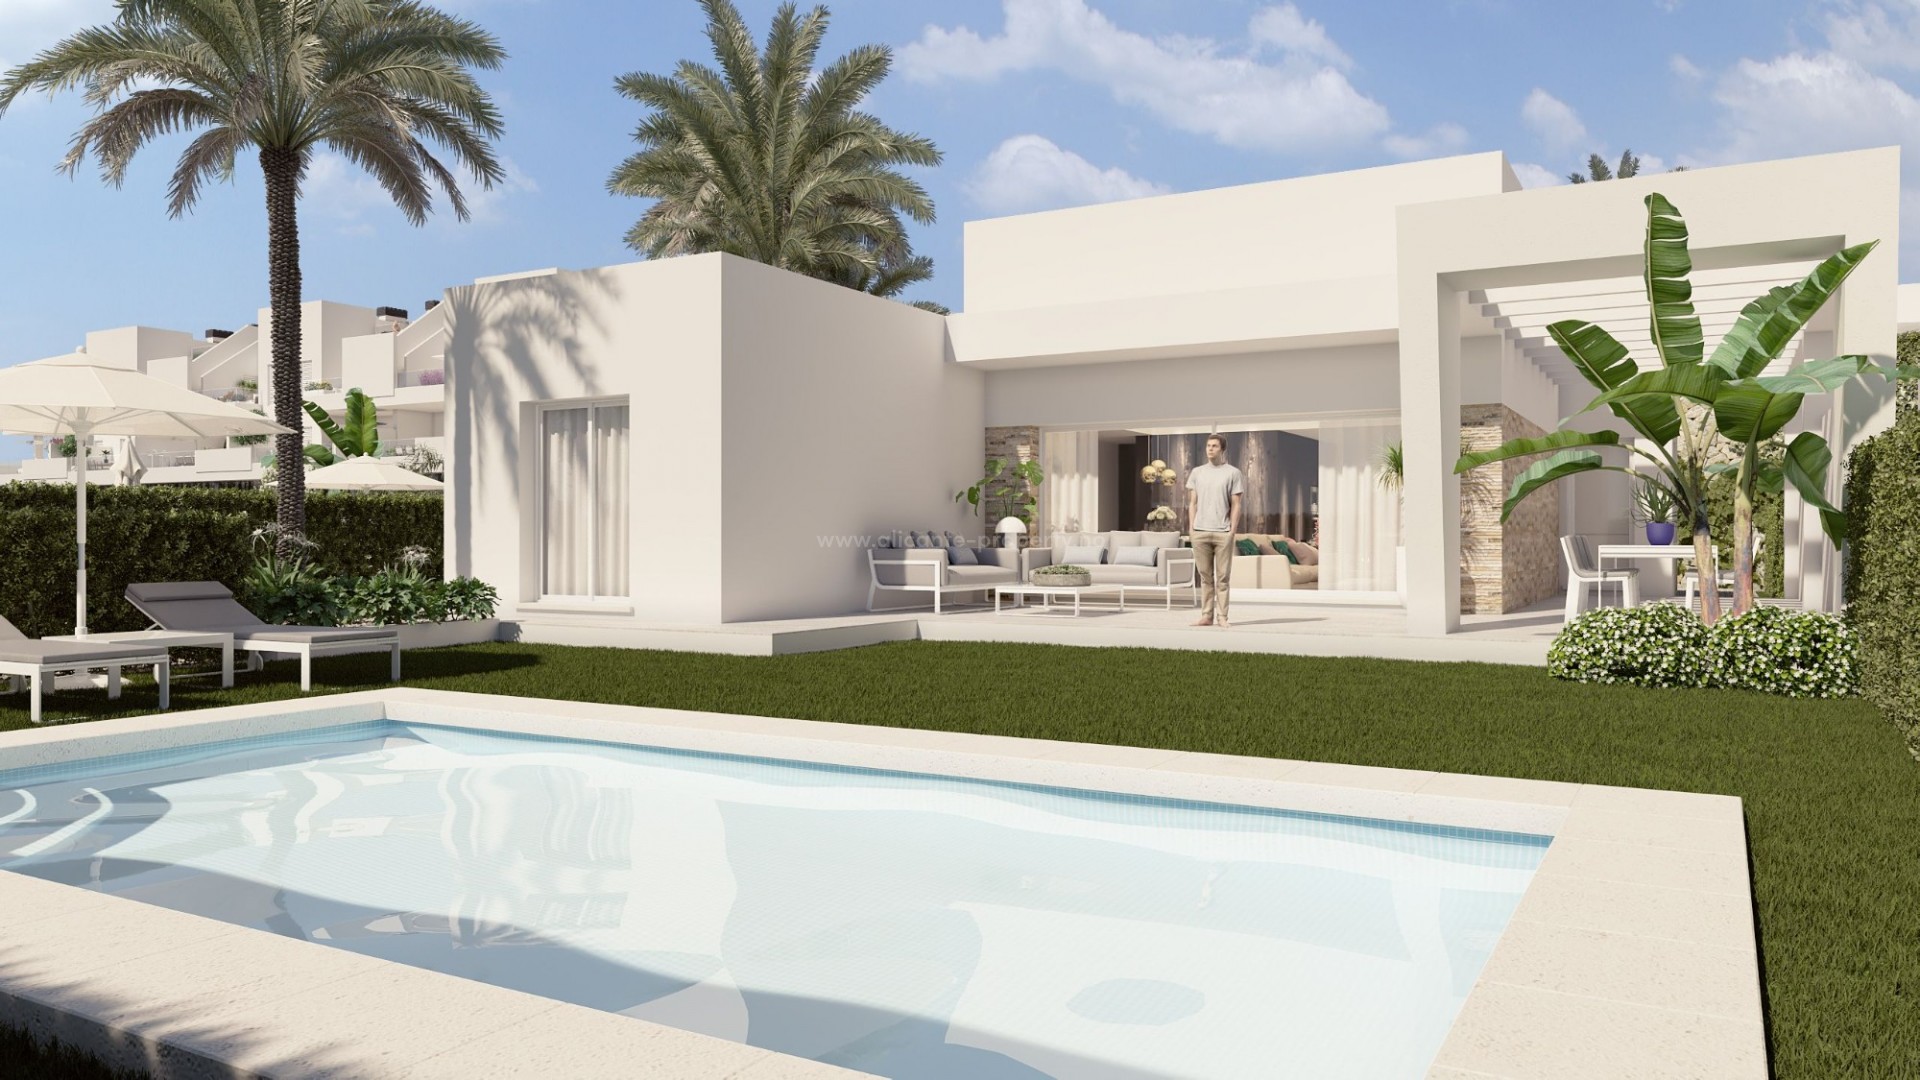 Brand new impressive villas/houses in La Finca Golf, 3 bedrooms and 2 bathrooms, garden with private swimming pool, outdoor area on large terrace